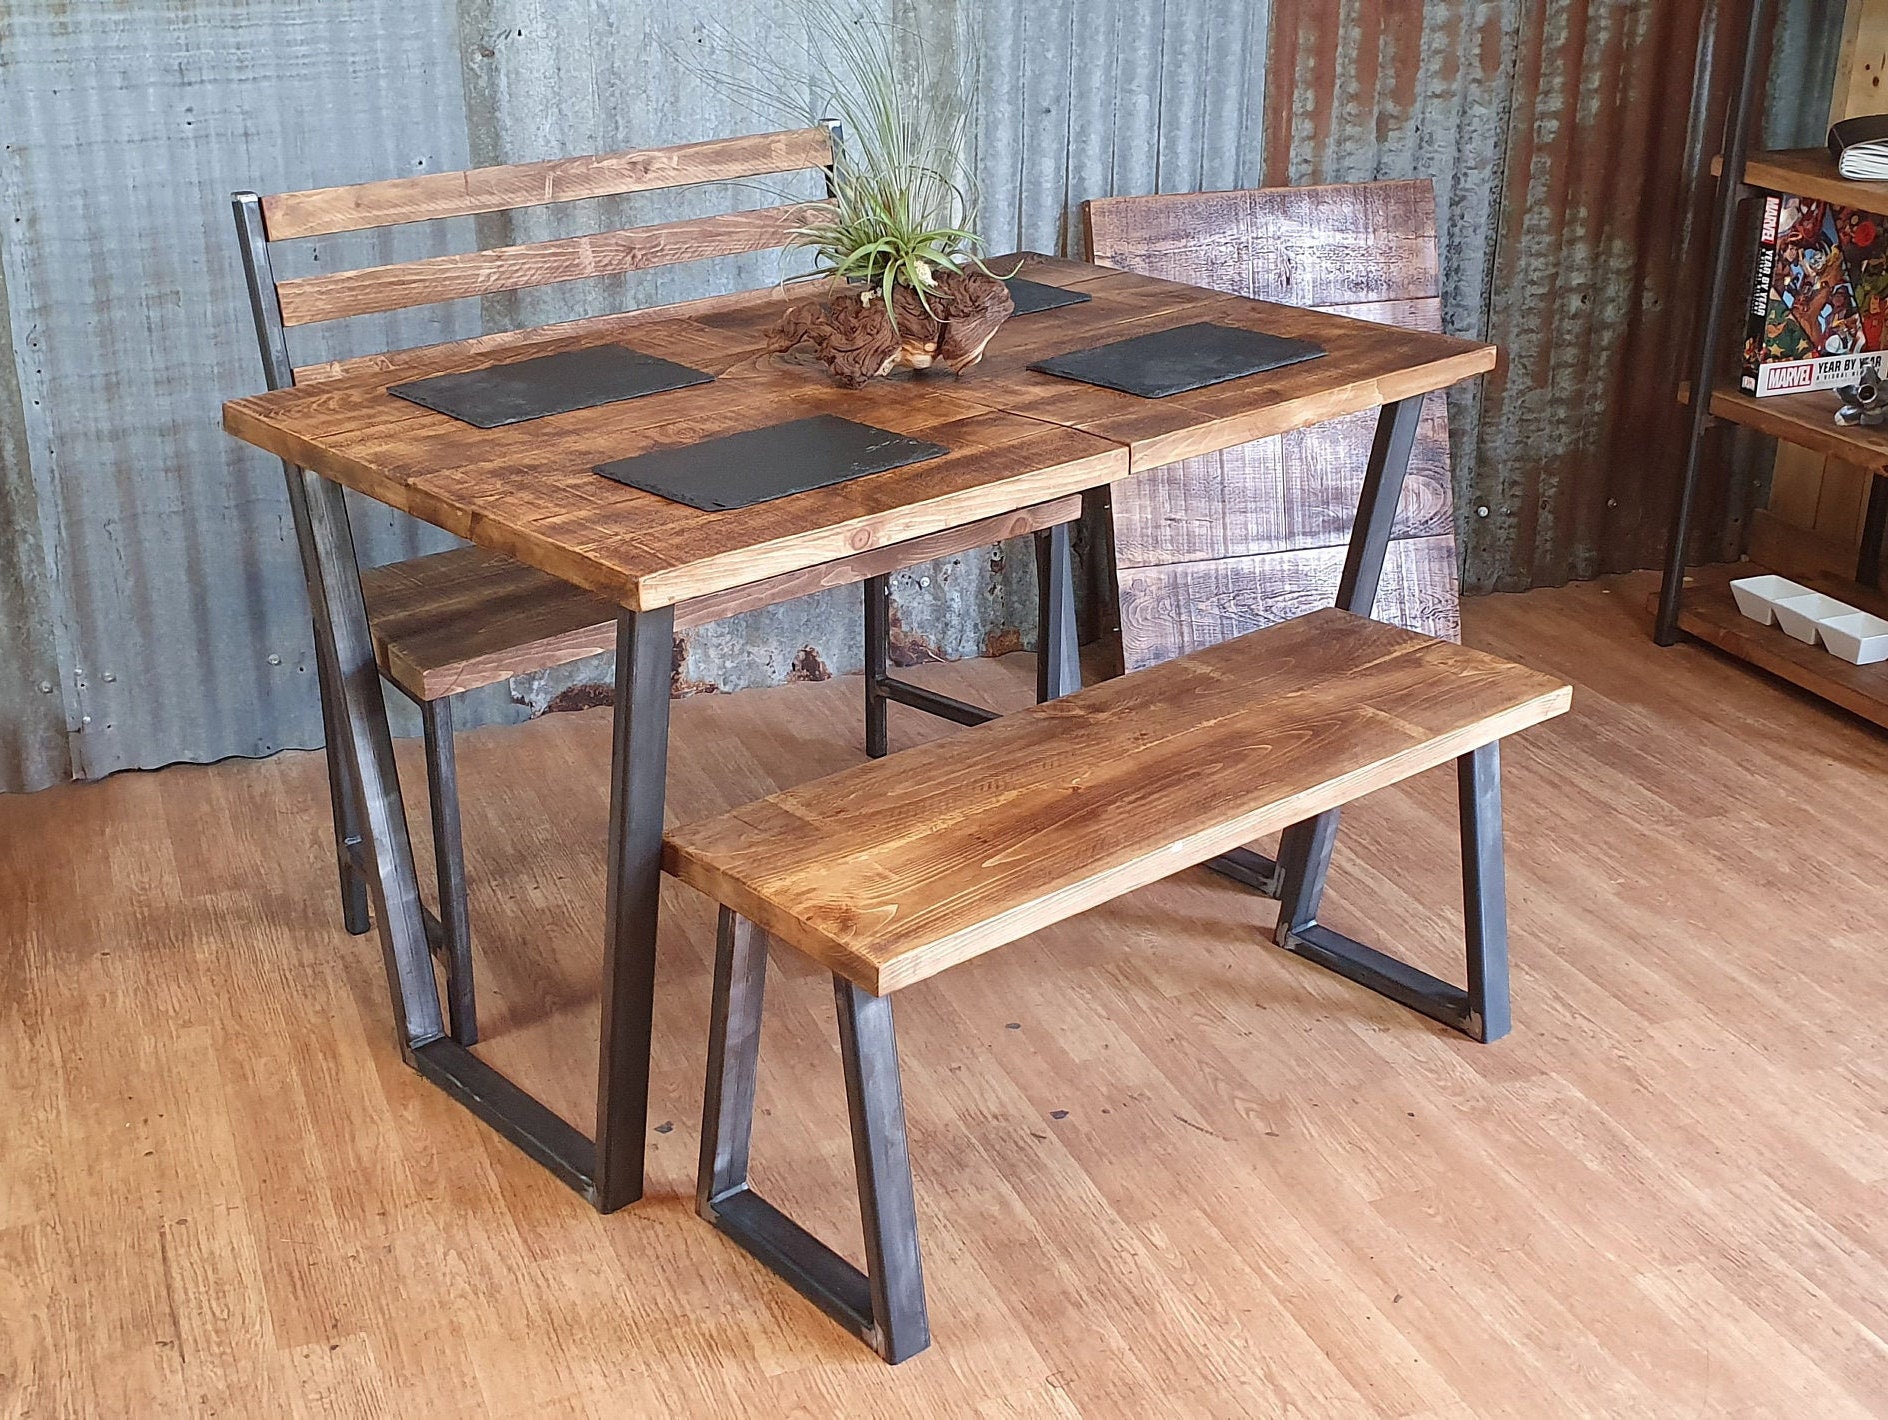 Calia style dining table, industrial style dining table, table and